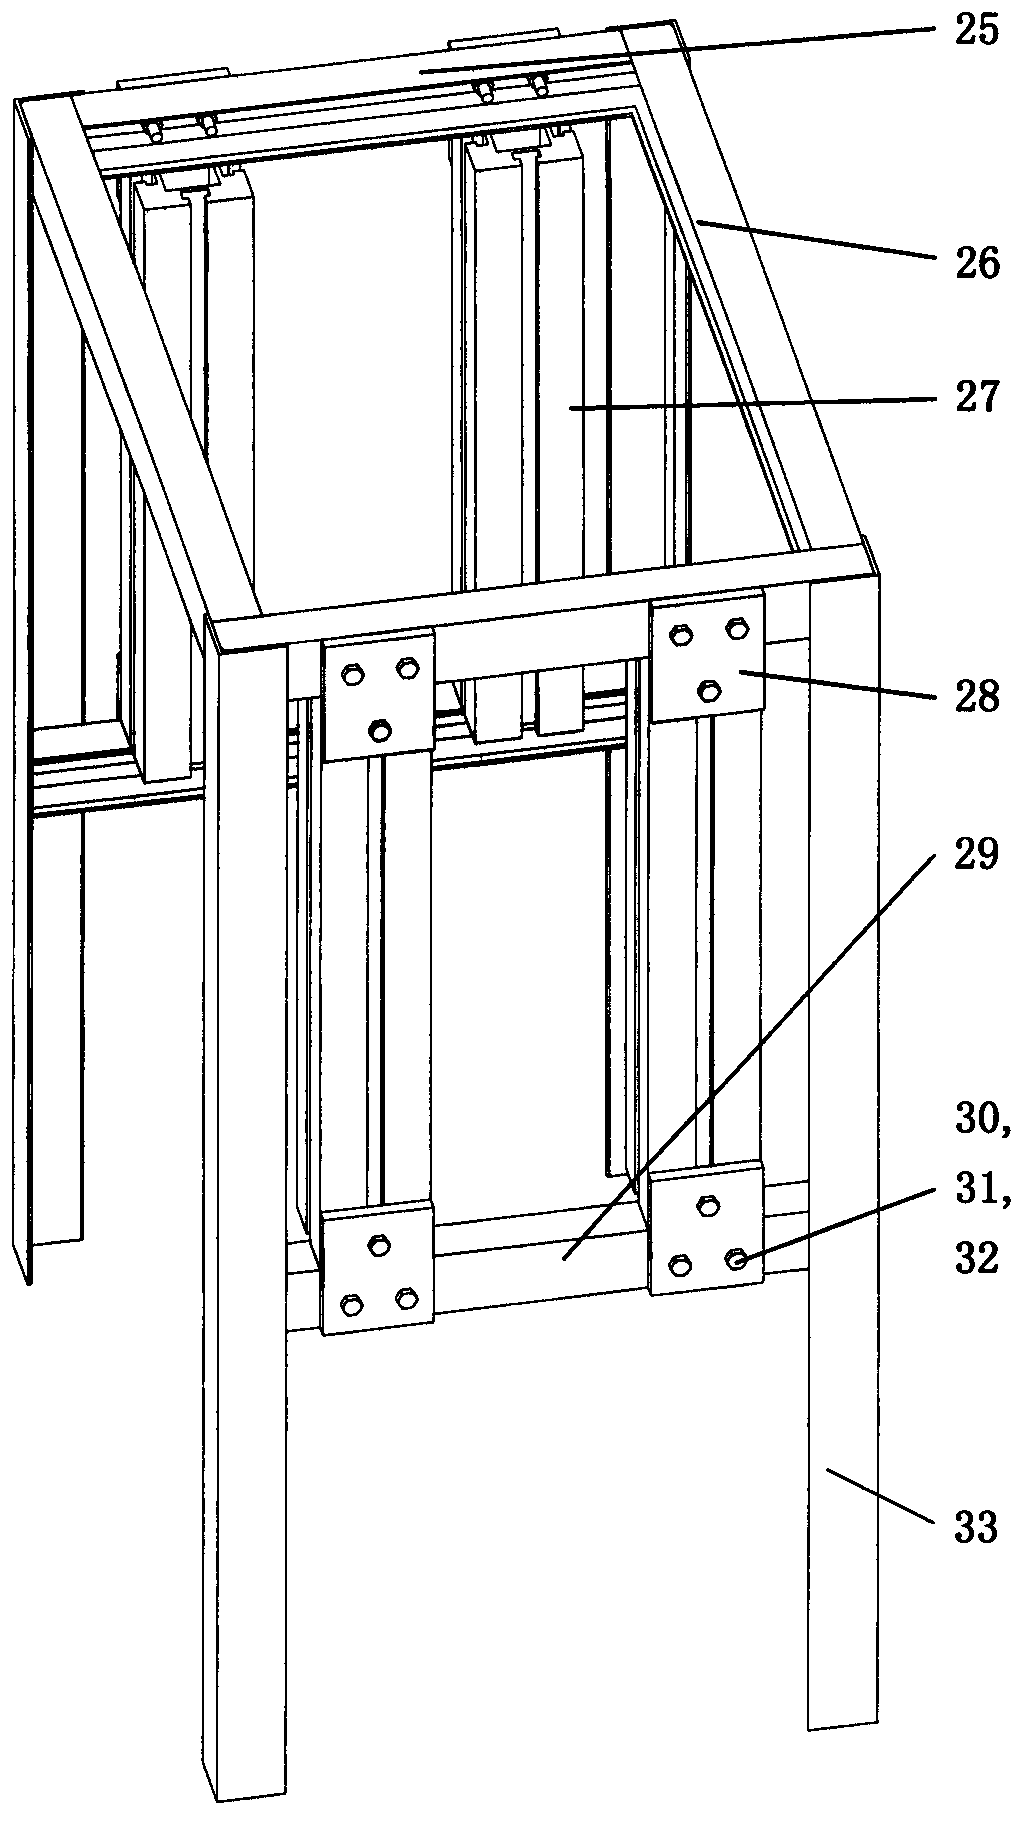 Deep-sea pipe-in-pipe mechanical transfer characteristic analysis experiment device